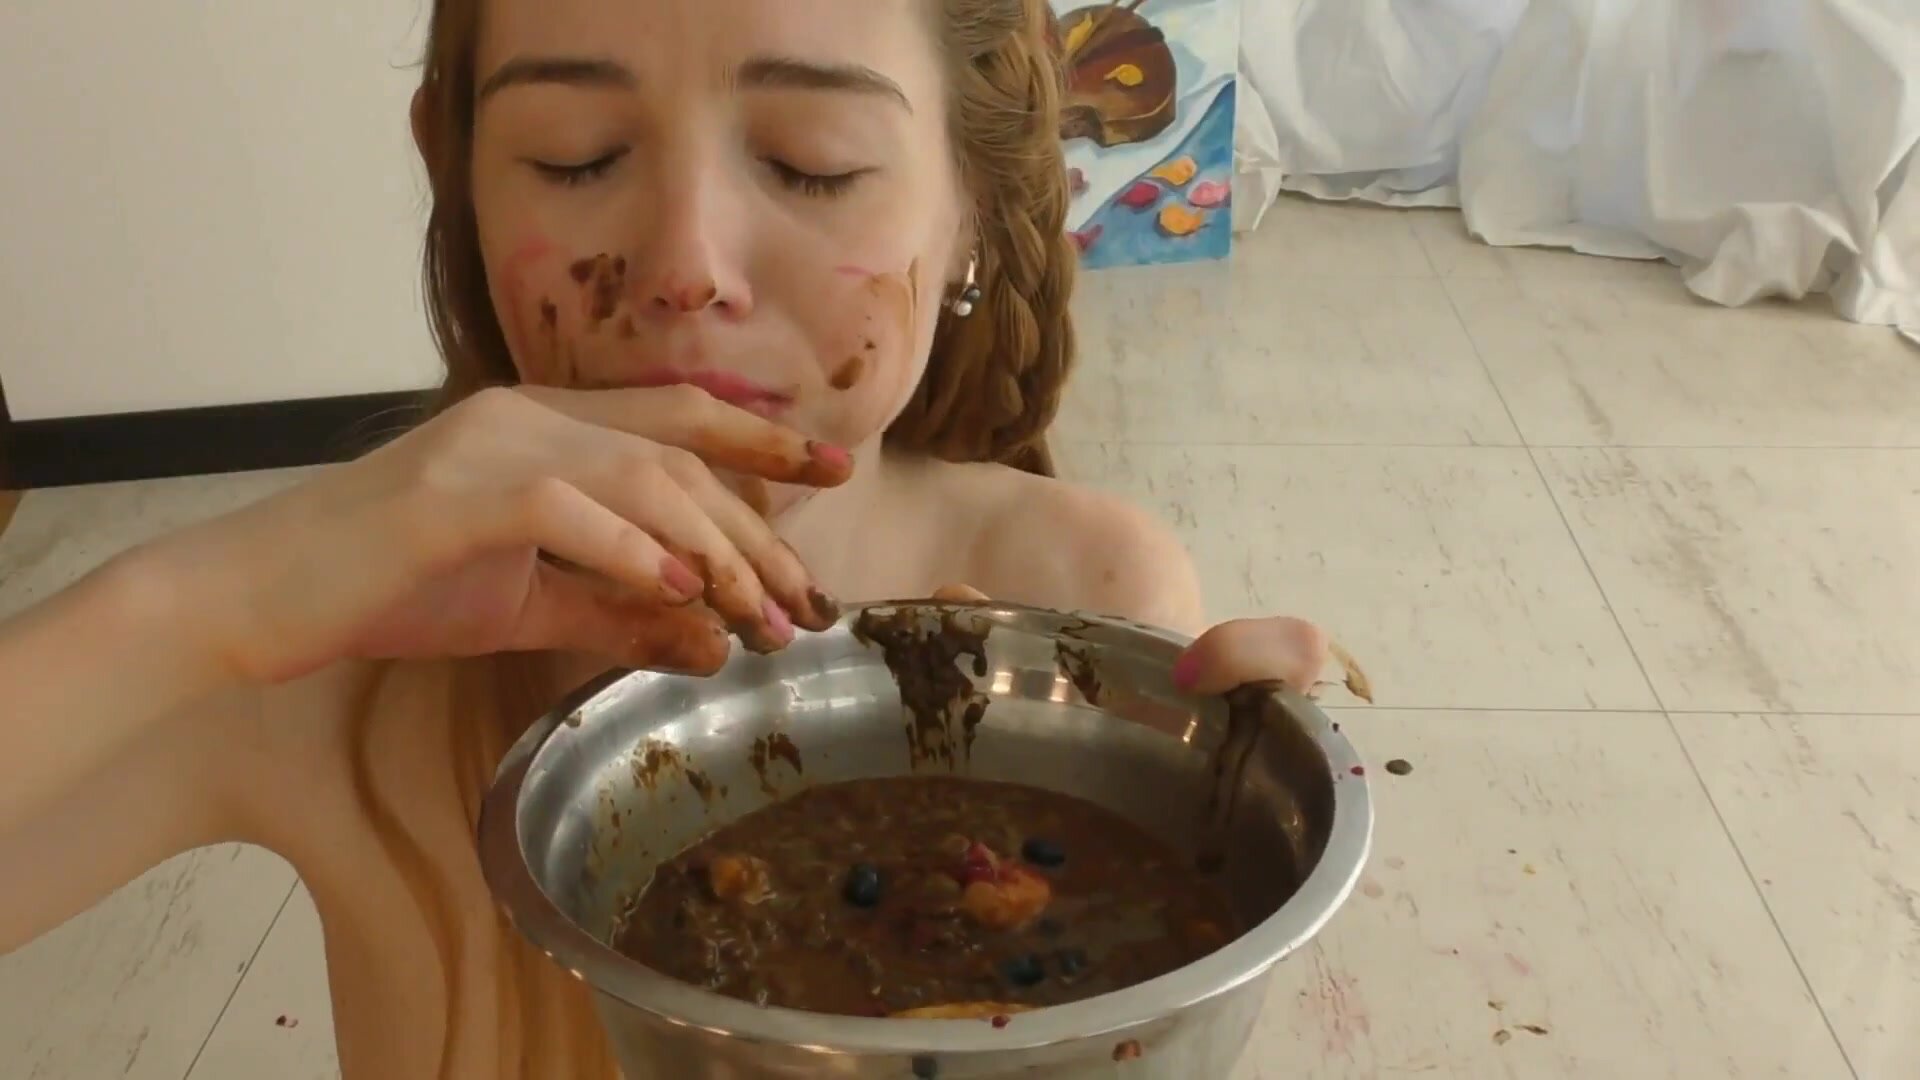 Scat Eating Full Time Muvie Porn - Russian slut eats shit with red fruits and banana - ThisVid.com